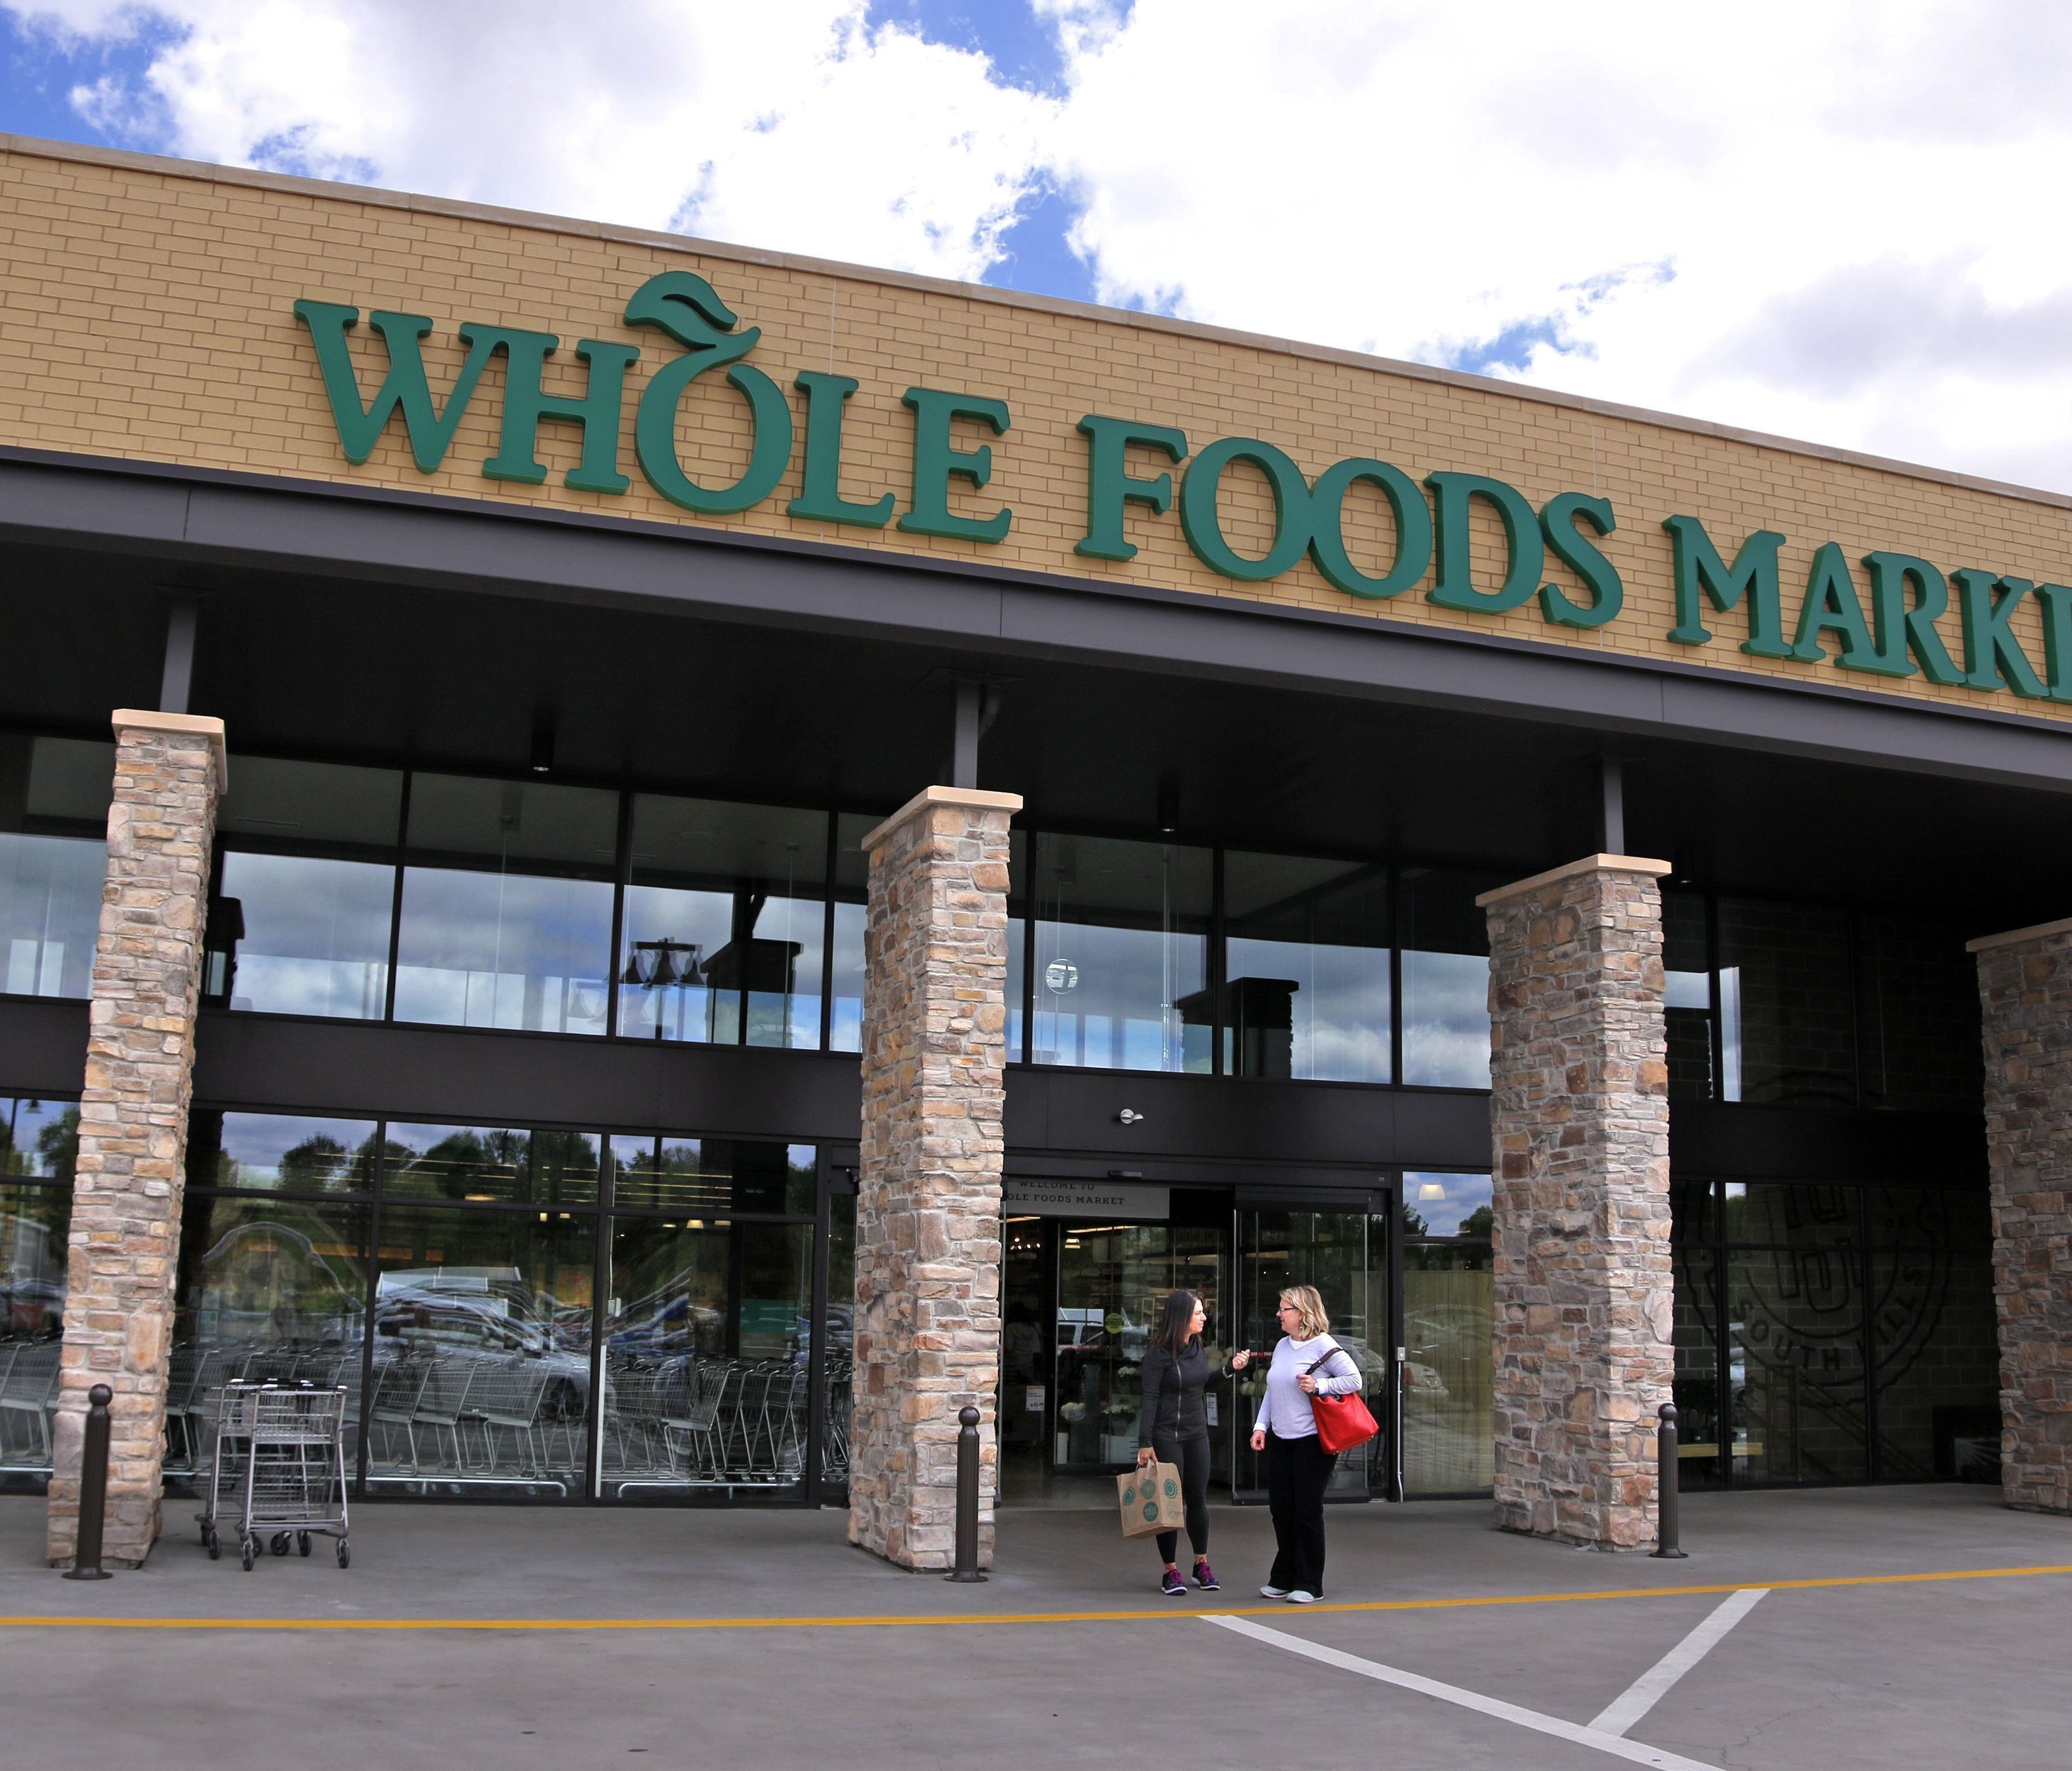 Amazon wants to acquire Whole Foods, but will any other buyers step up?